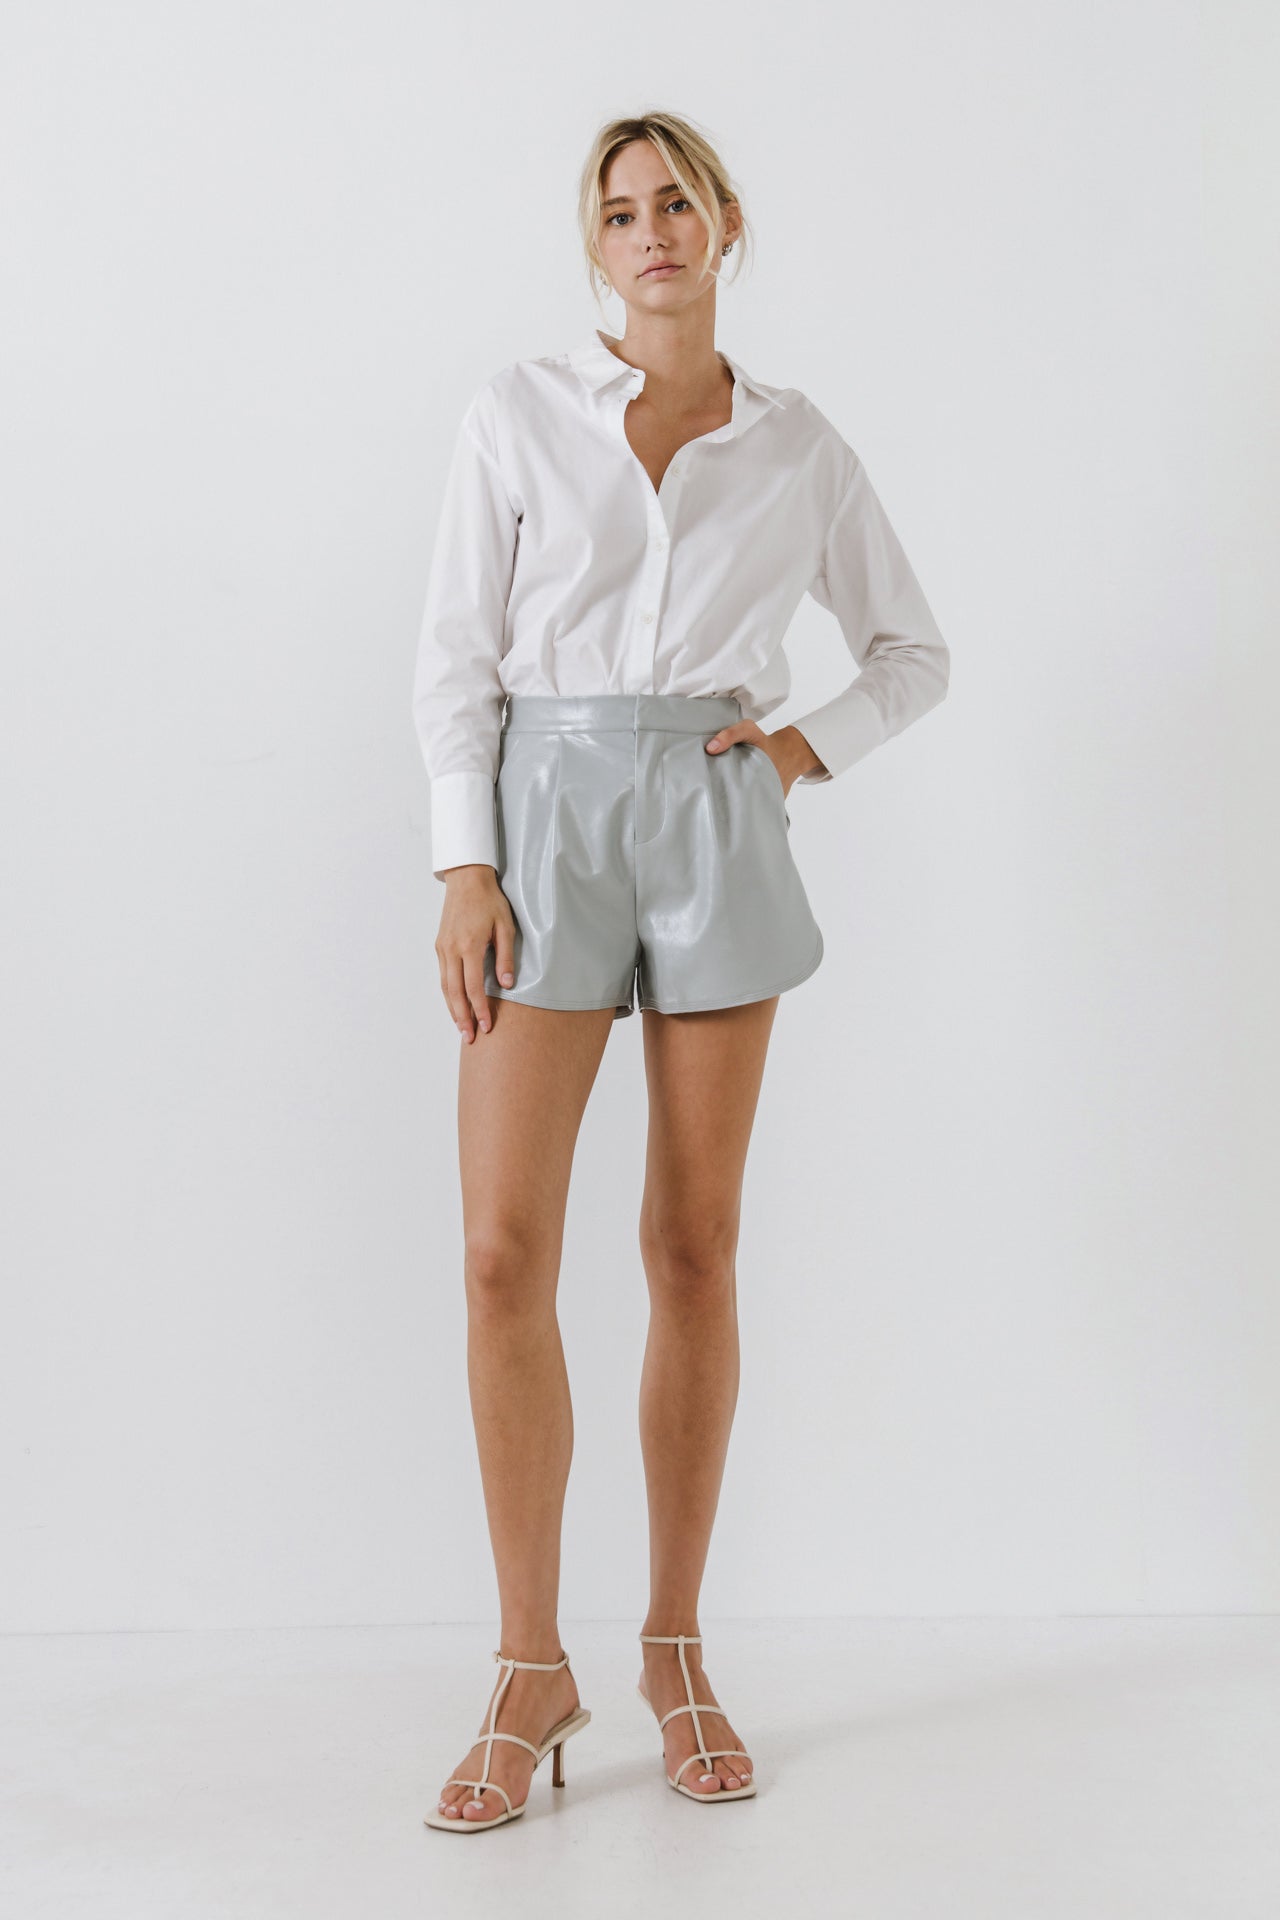 High-Waisted Faux Leather Shorts